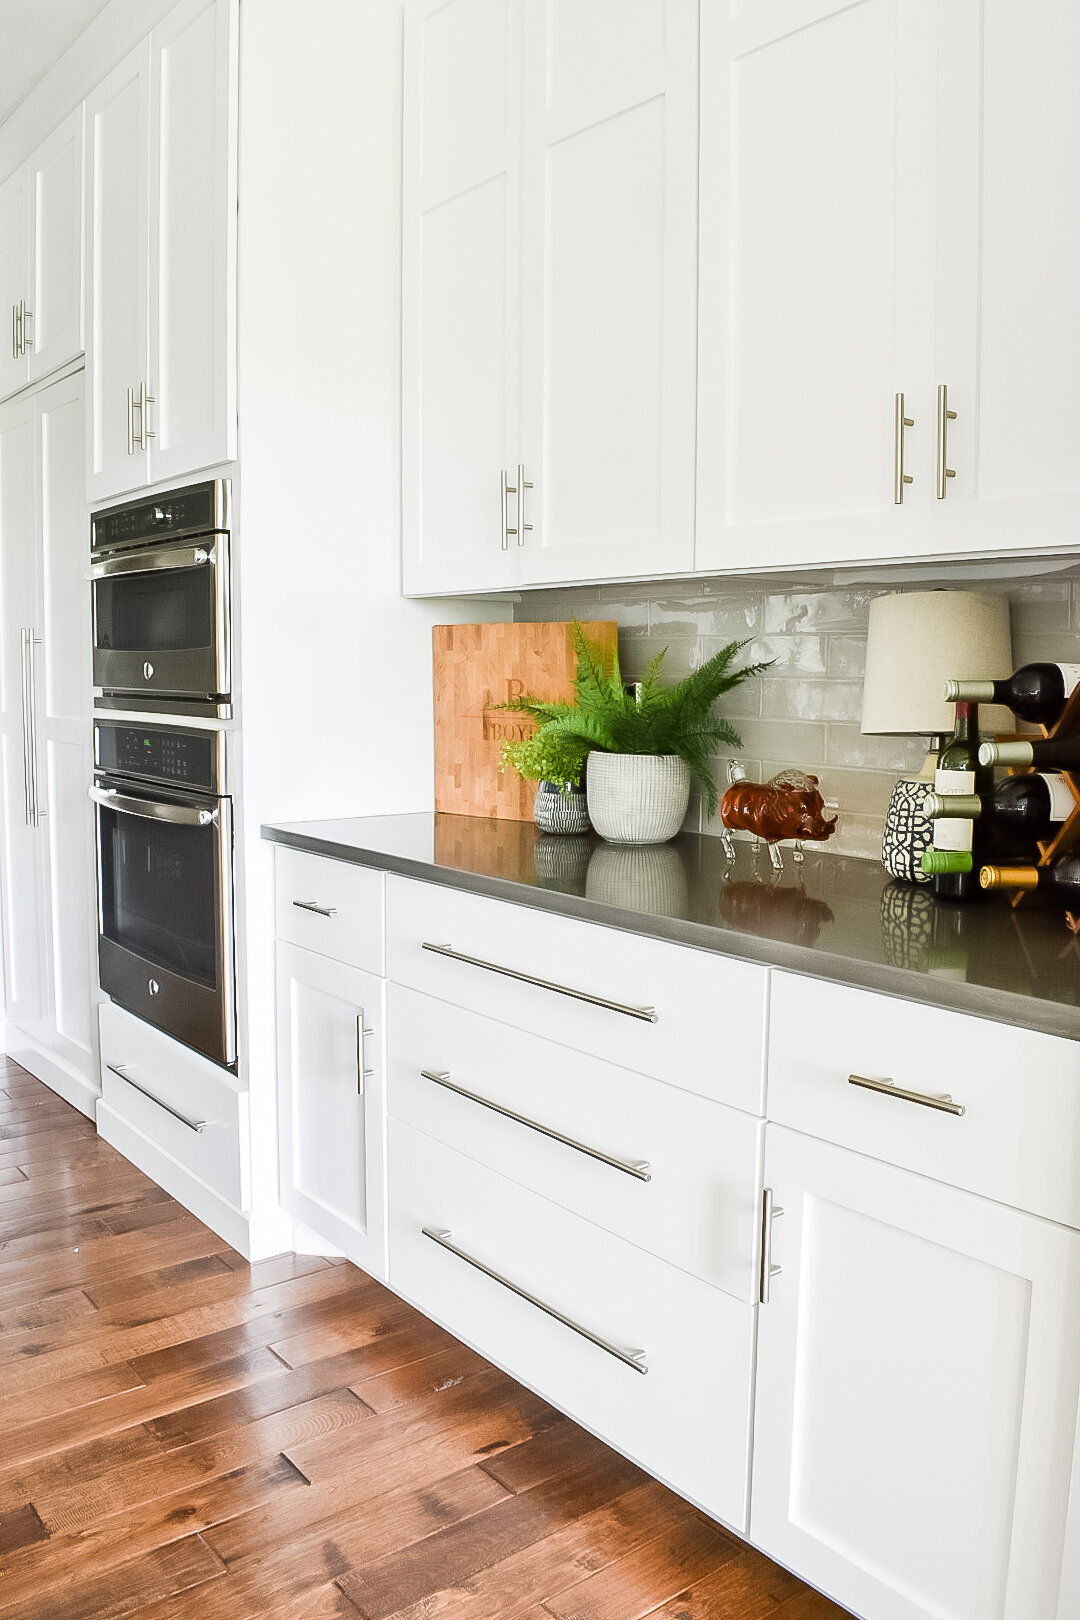 White kitchen cabinets with stainless steel hardware